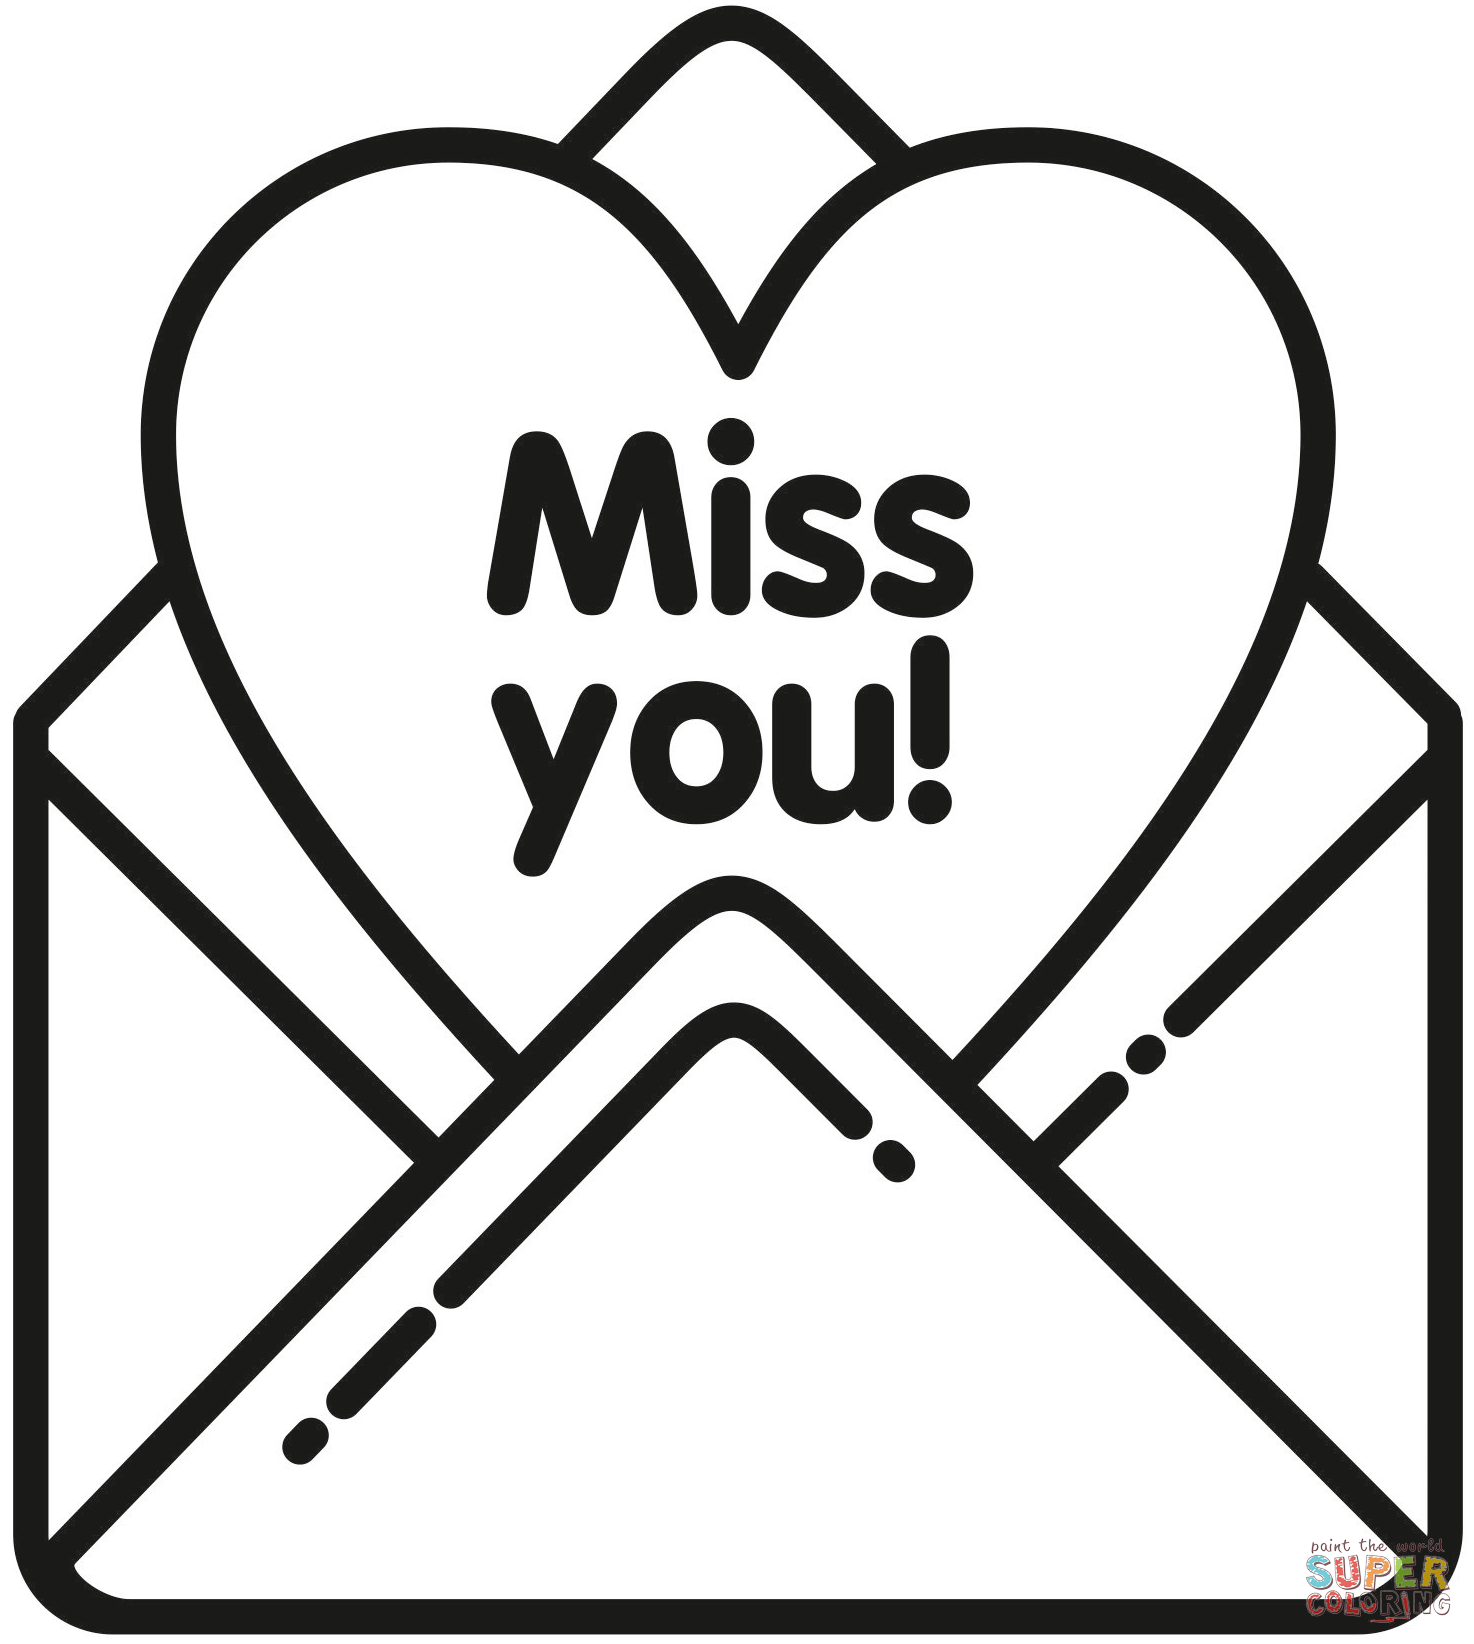 Miss you coloring page free printable coloring pages